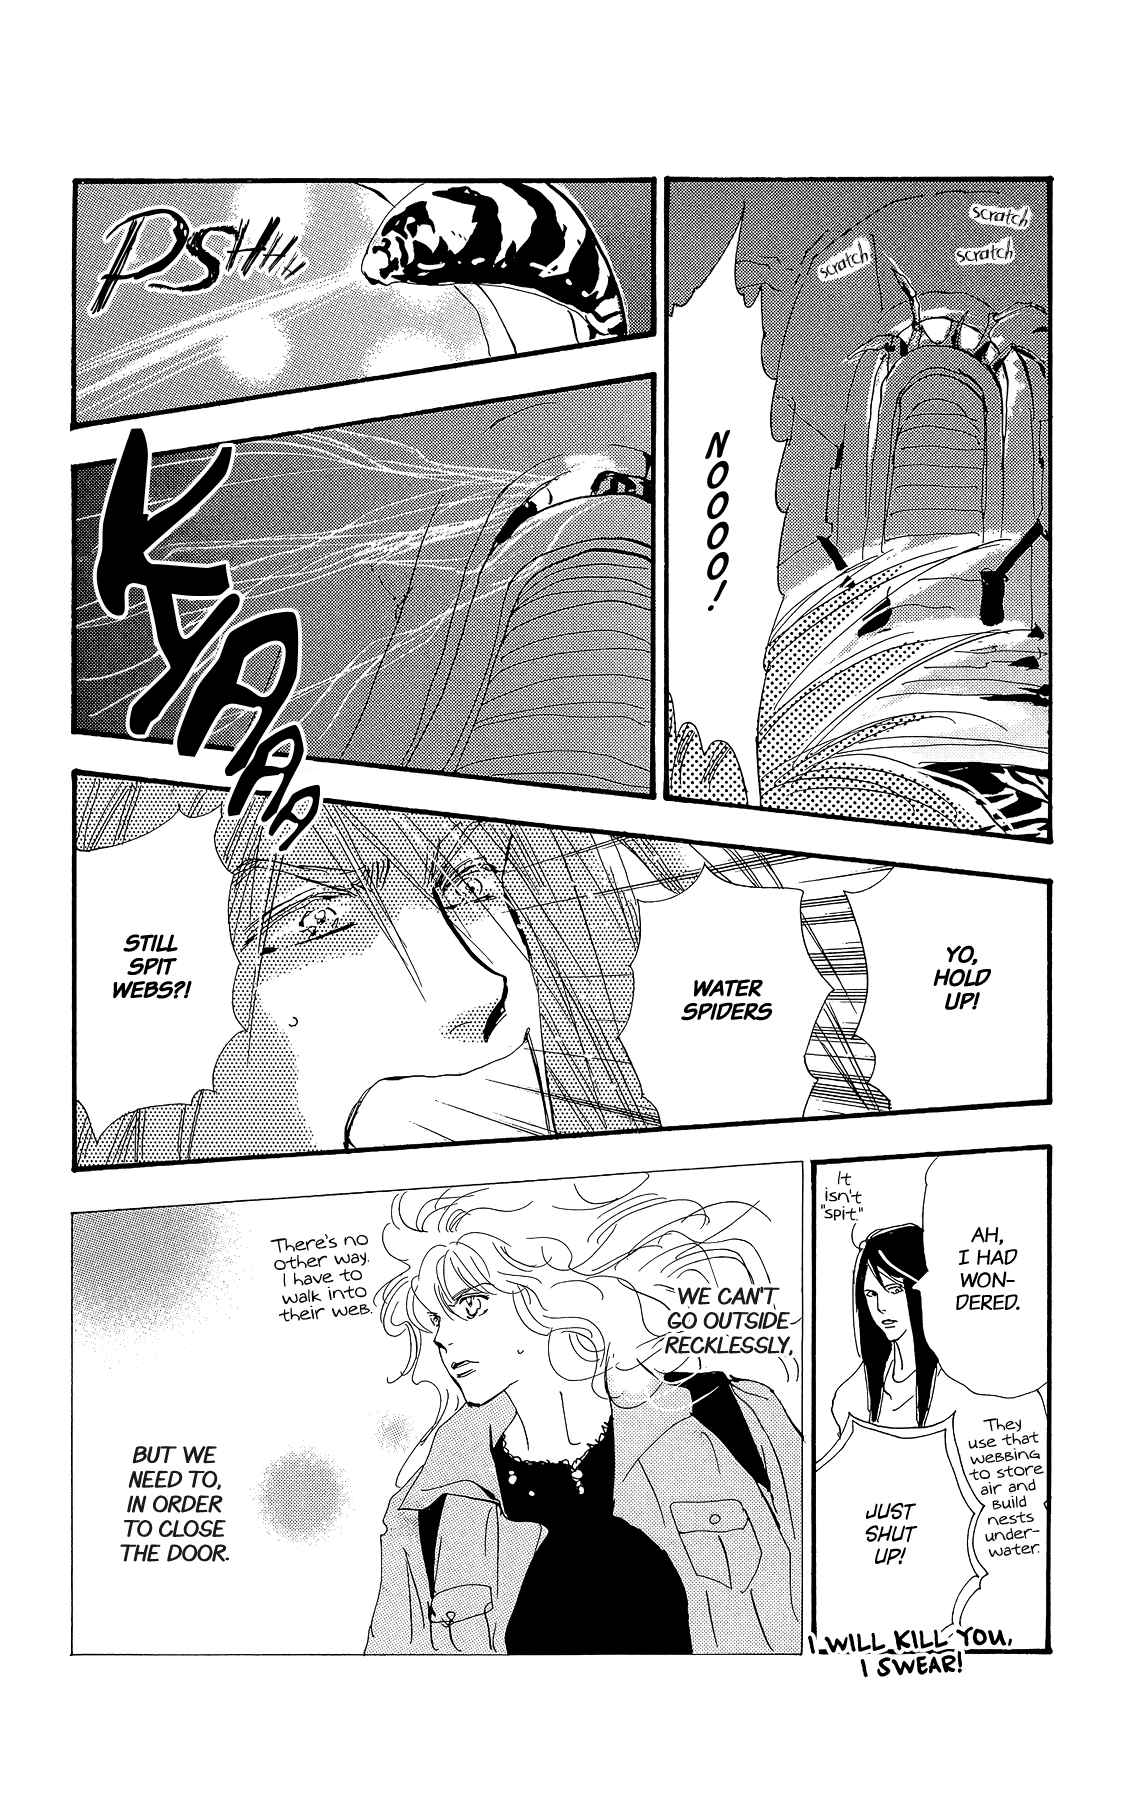 7 Seeds Vol. 34 Ch. 172 Sky Chapter 9 [Tag Team]